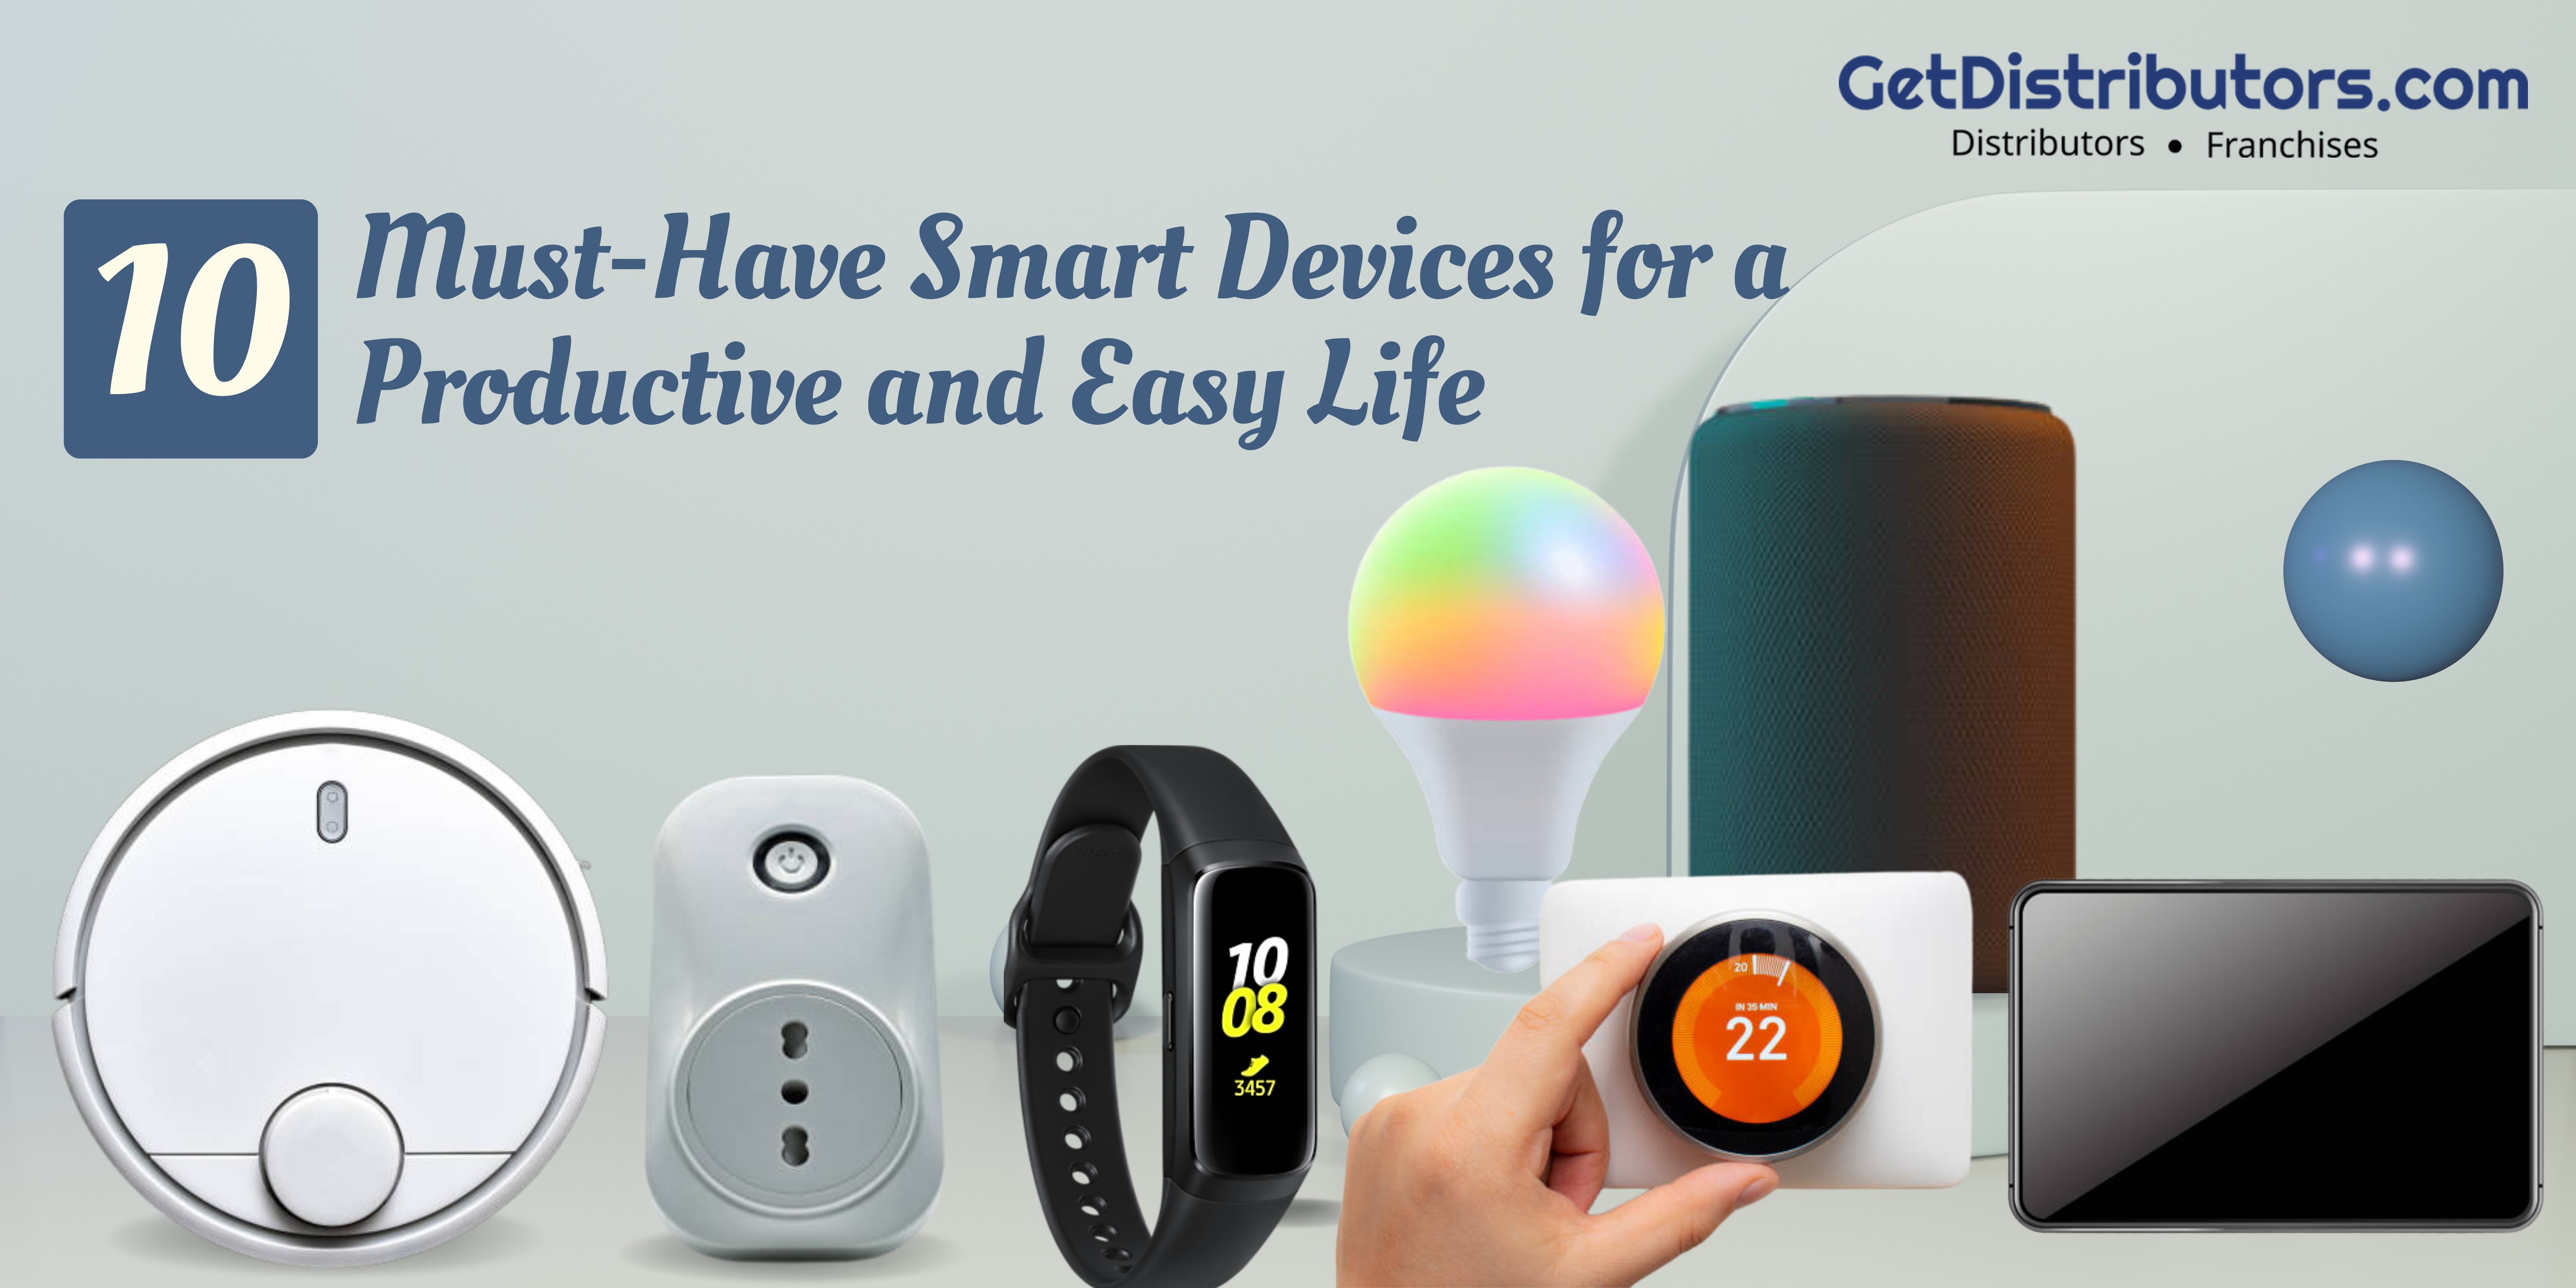 10 Must-Have Smart Devices for a Productive and Easy Life